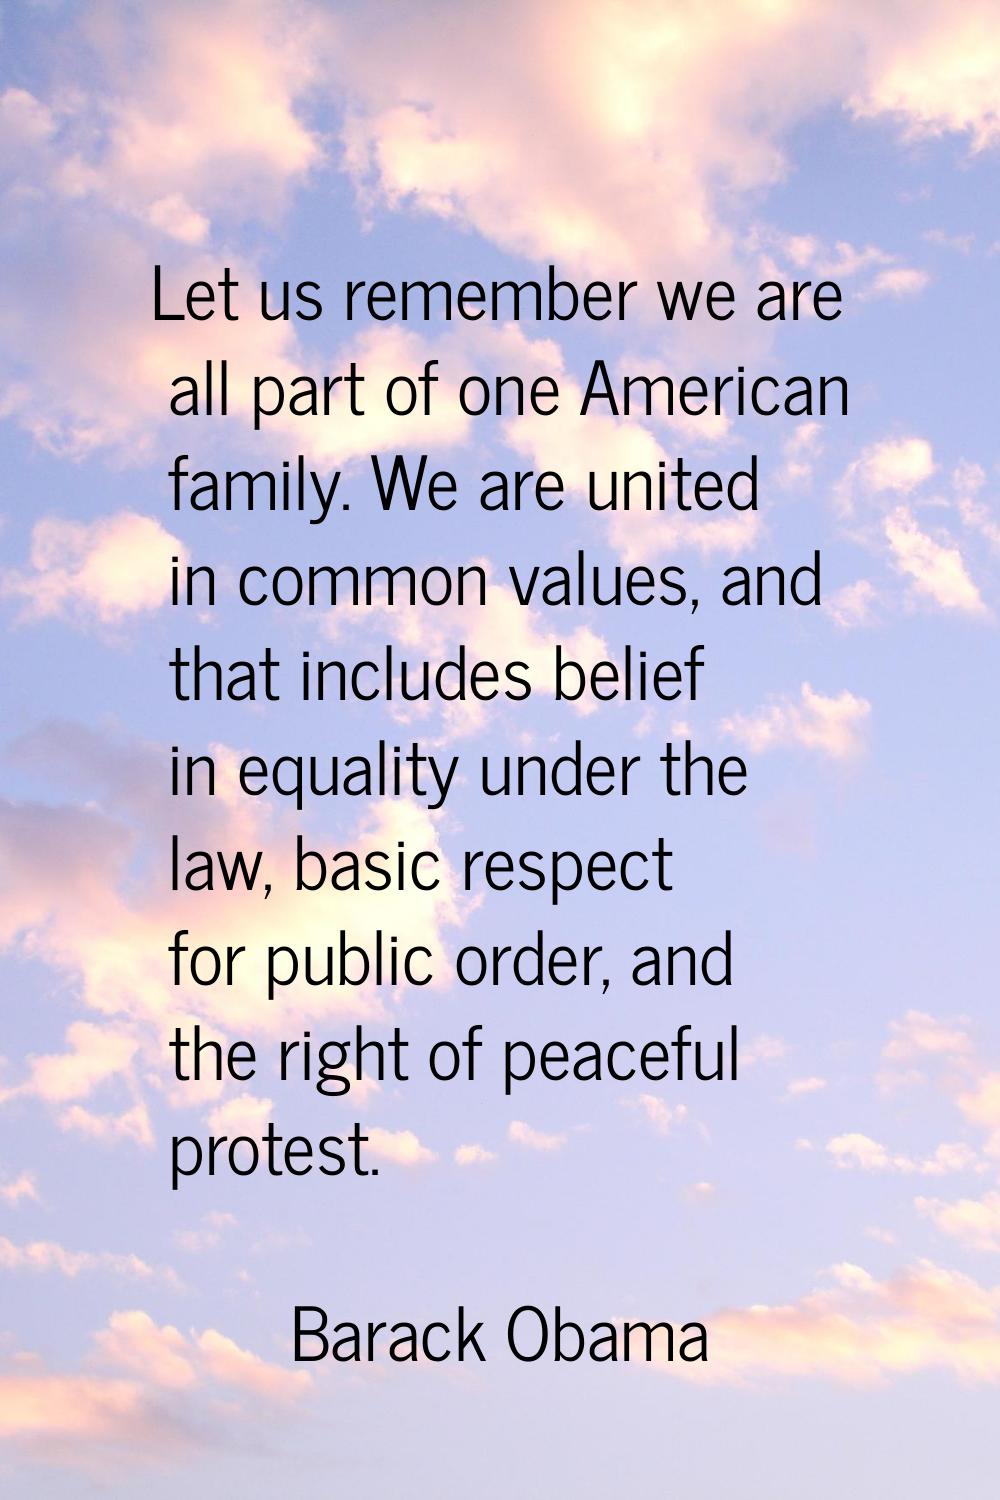 Let us remember we are all part of one American family. We are united in common values, and that in